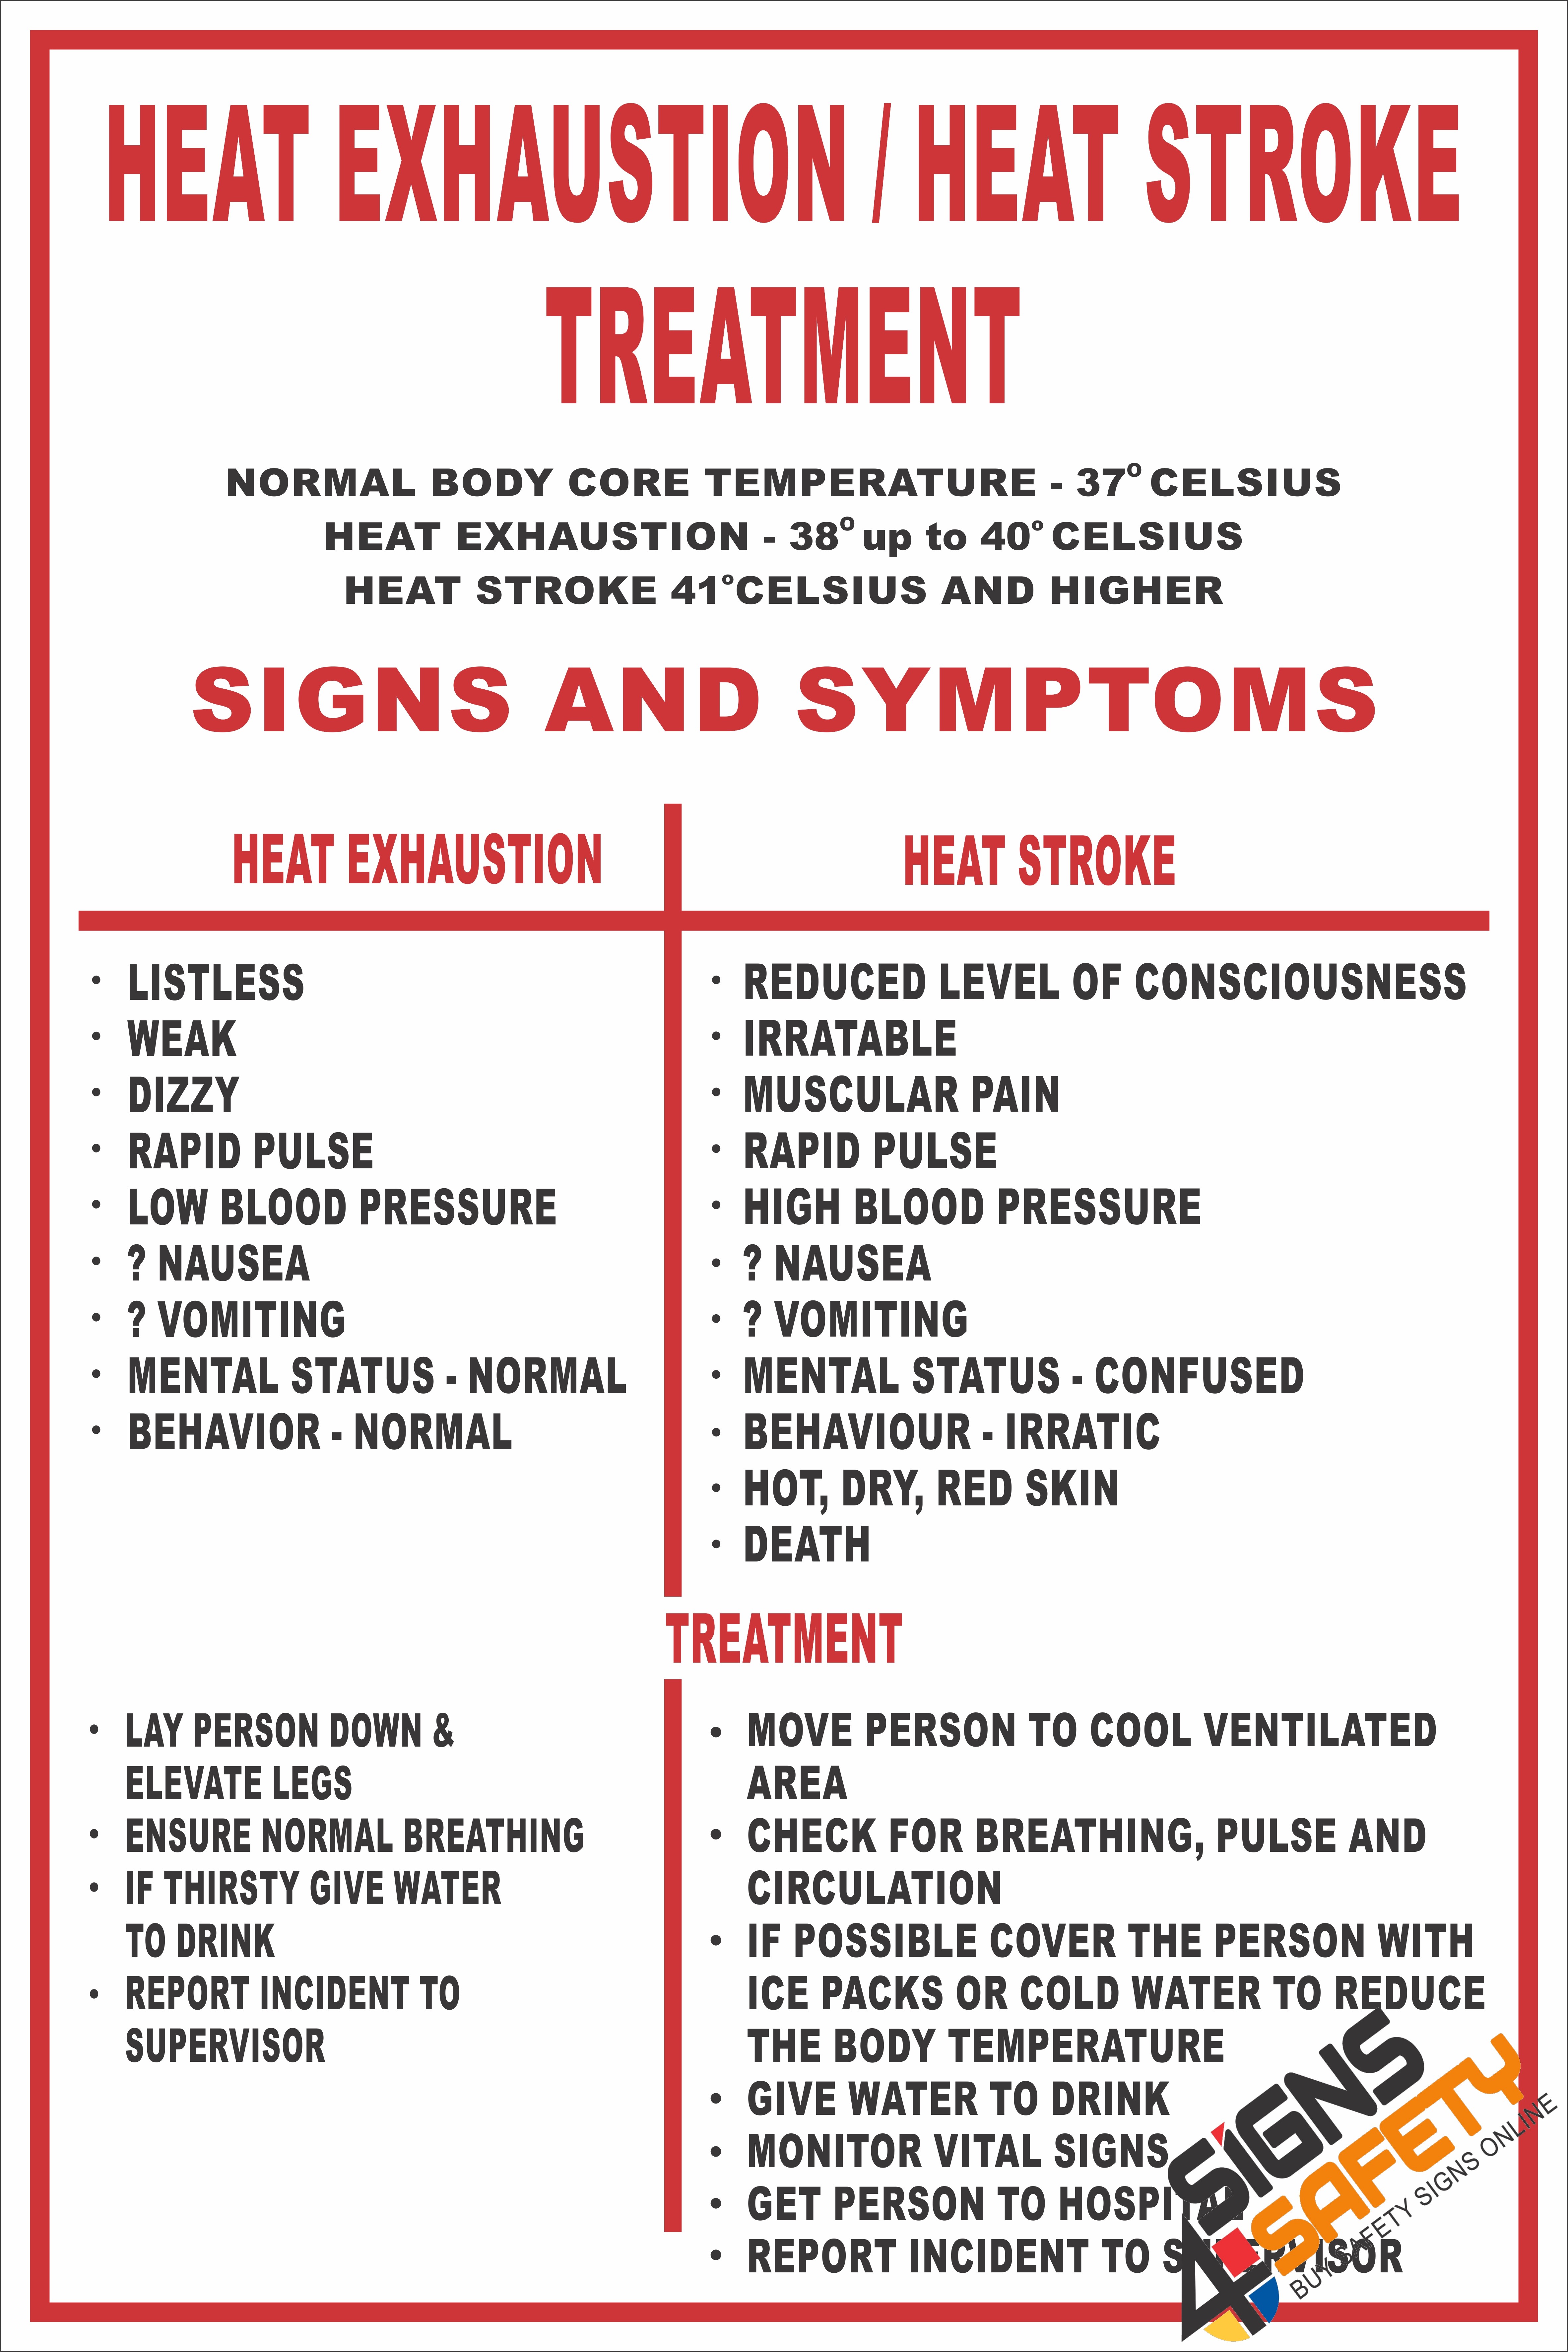 Heat Exhaustion Symptoms and First Aid - St John Ambulance